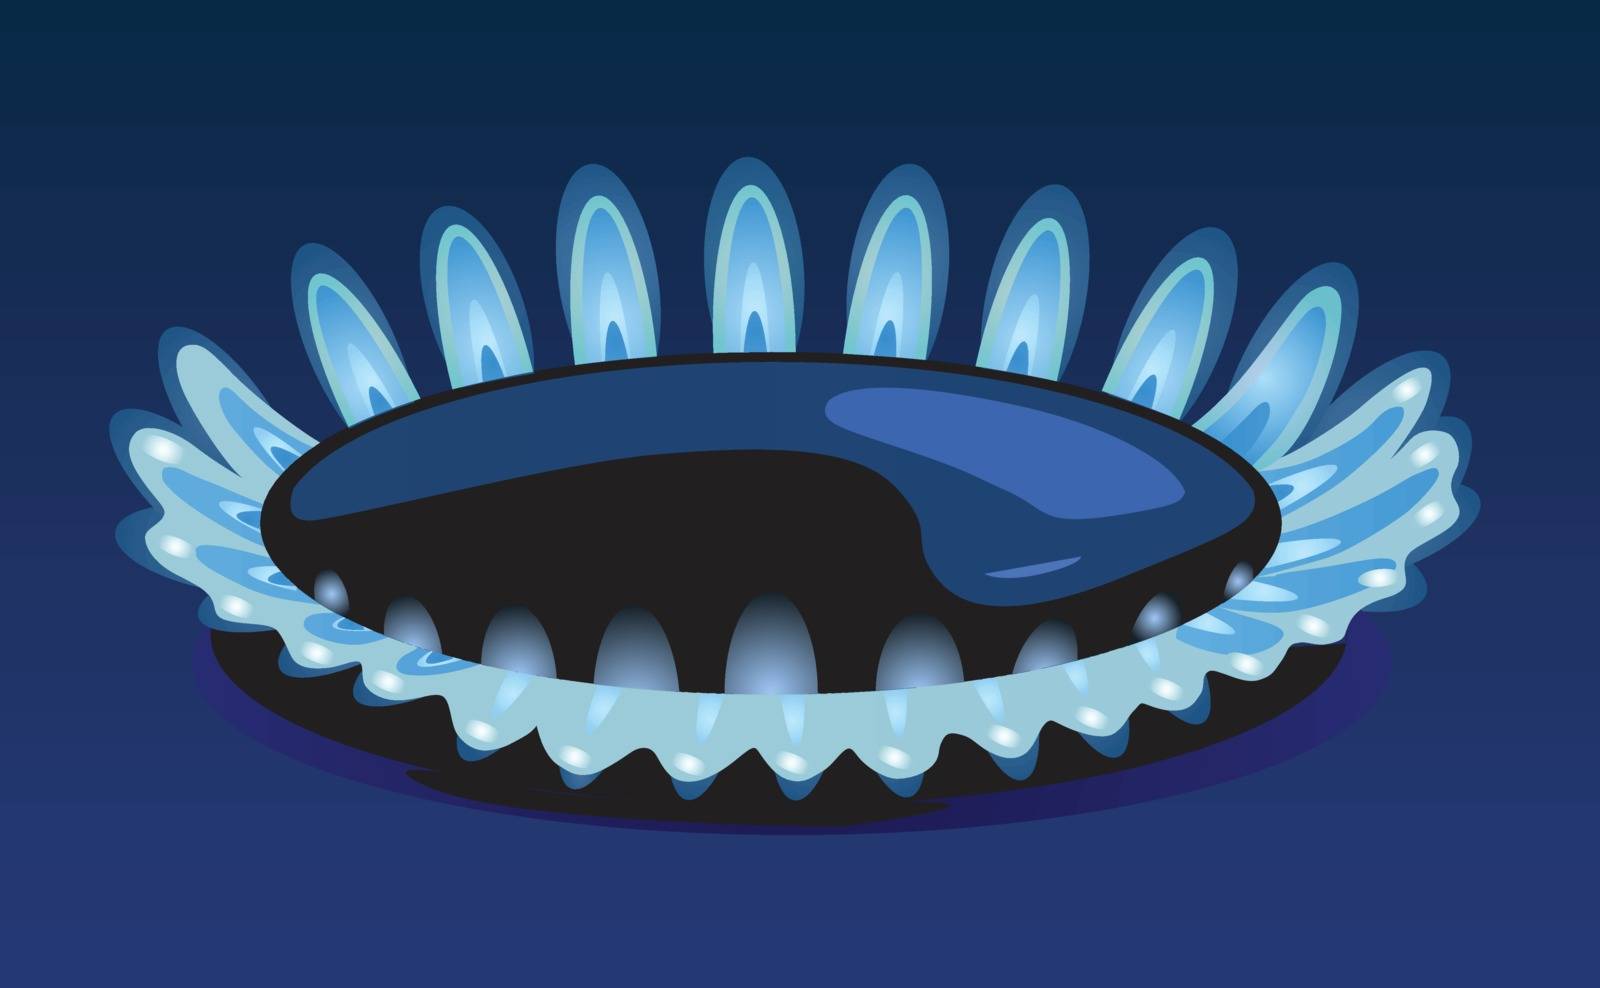 Flames of gas stove in the dark Vector eps 10